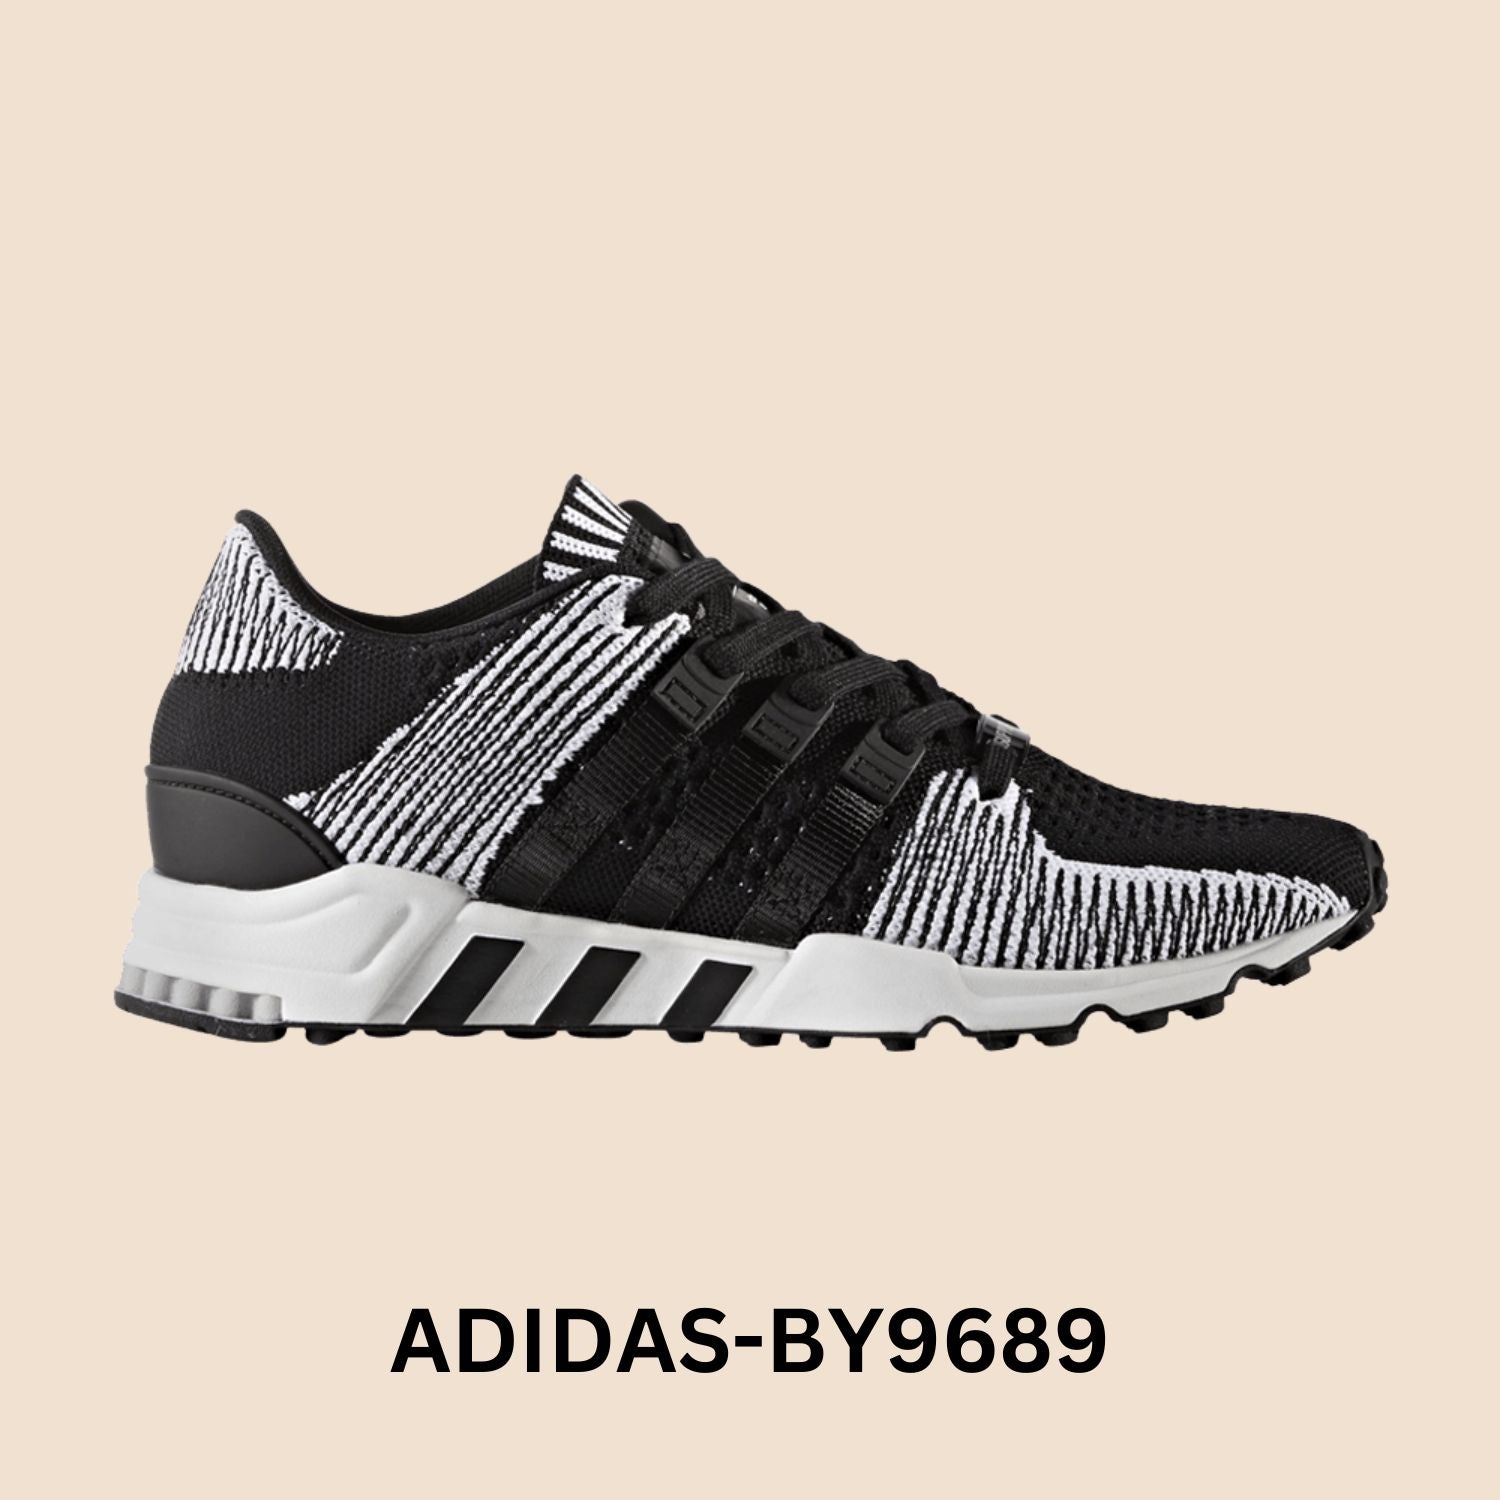 Adidas EQT Support RF Primeknit Running Men's Shoes Style# BY9689